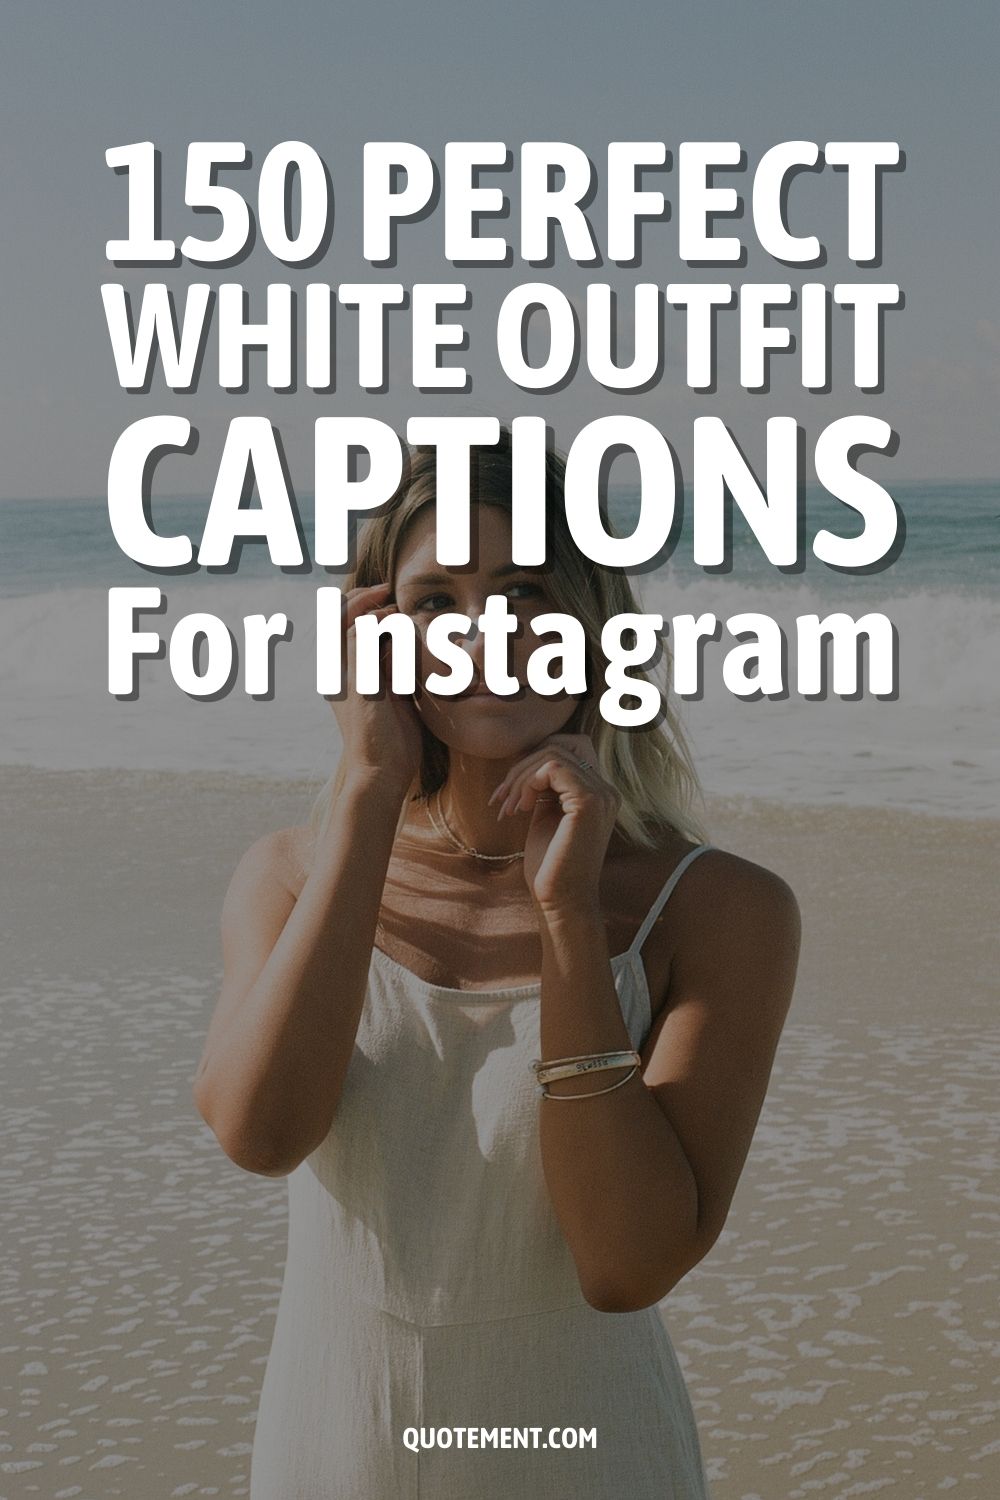 150 Perfect White Outfit Captions For Instagram 